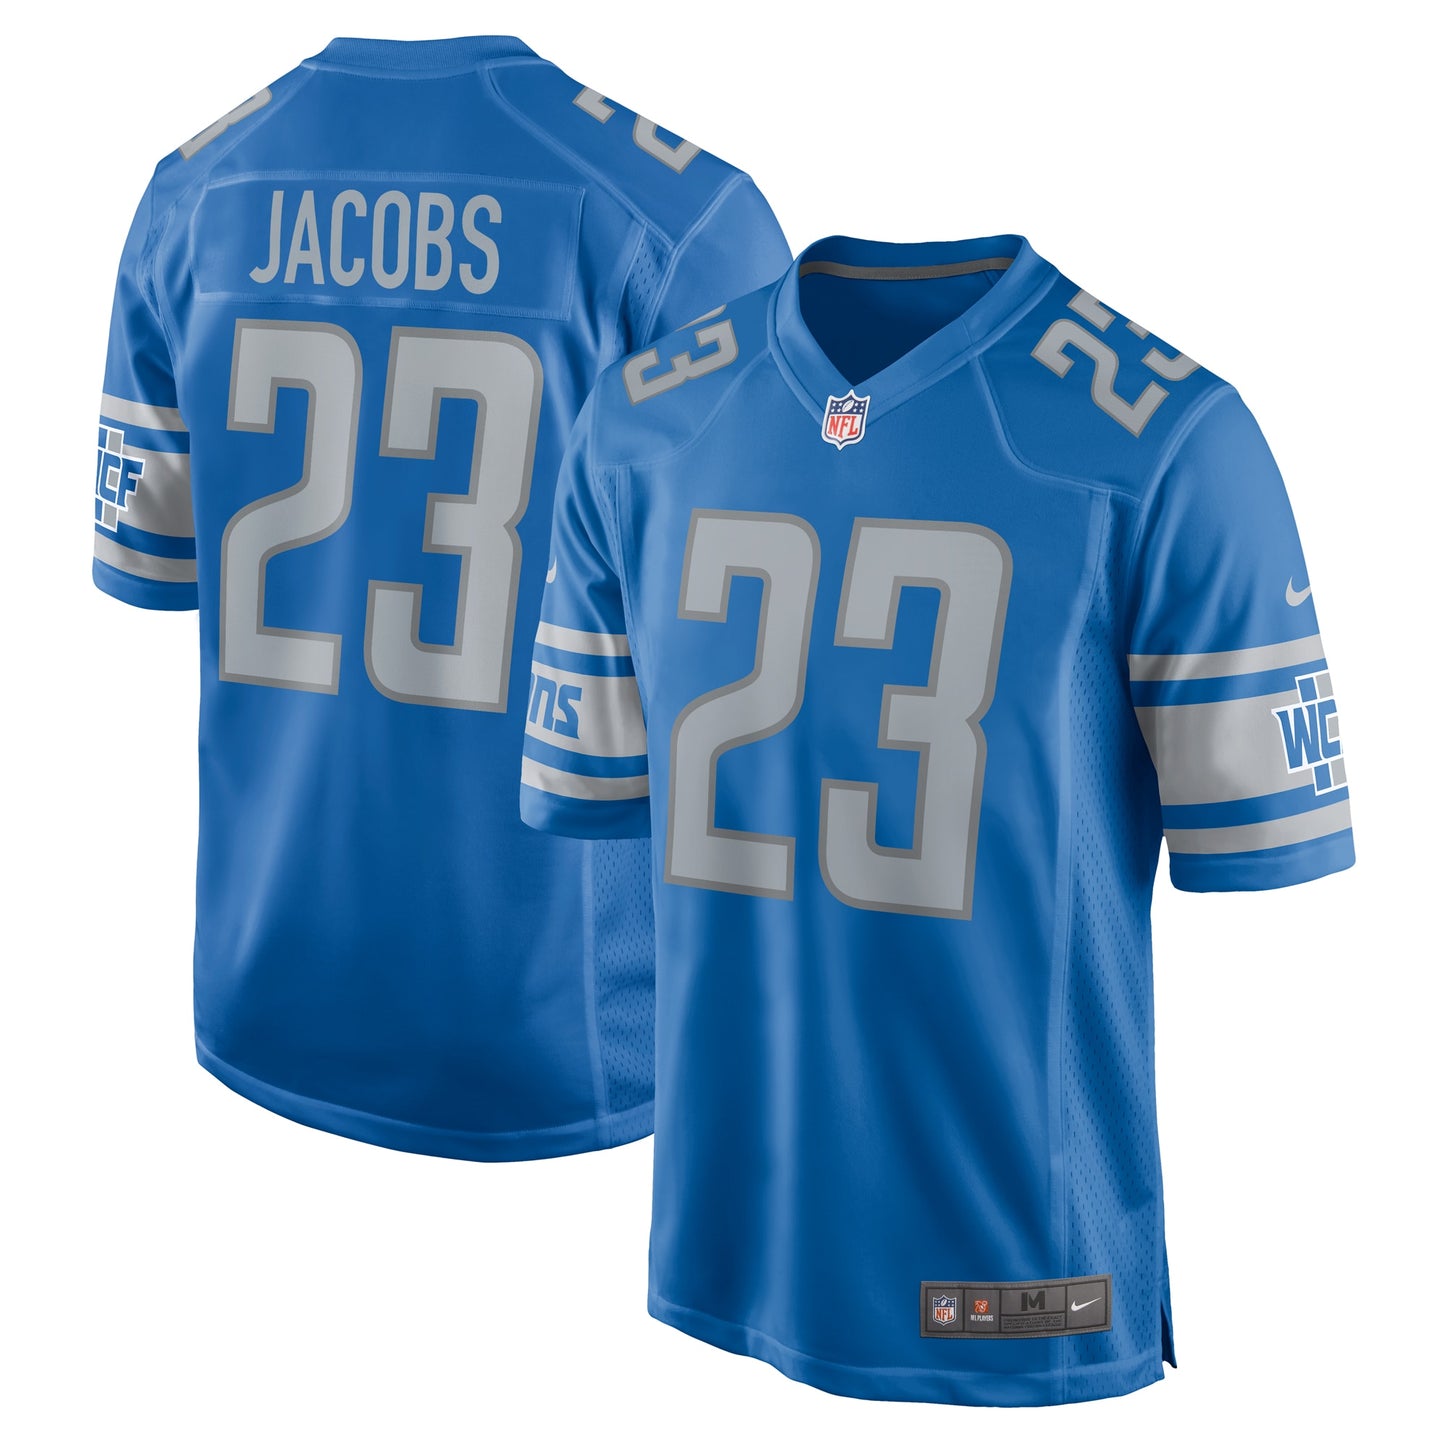 Jerry Jacobs Detroit Lions Nike Team Game Jersey -  Blue